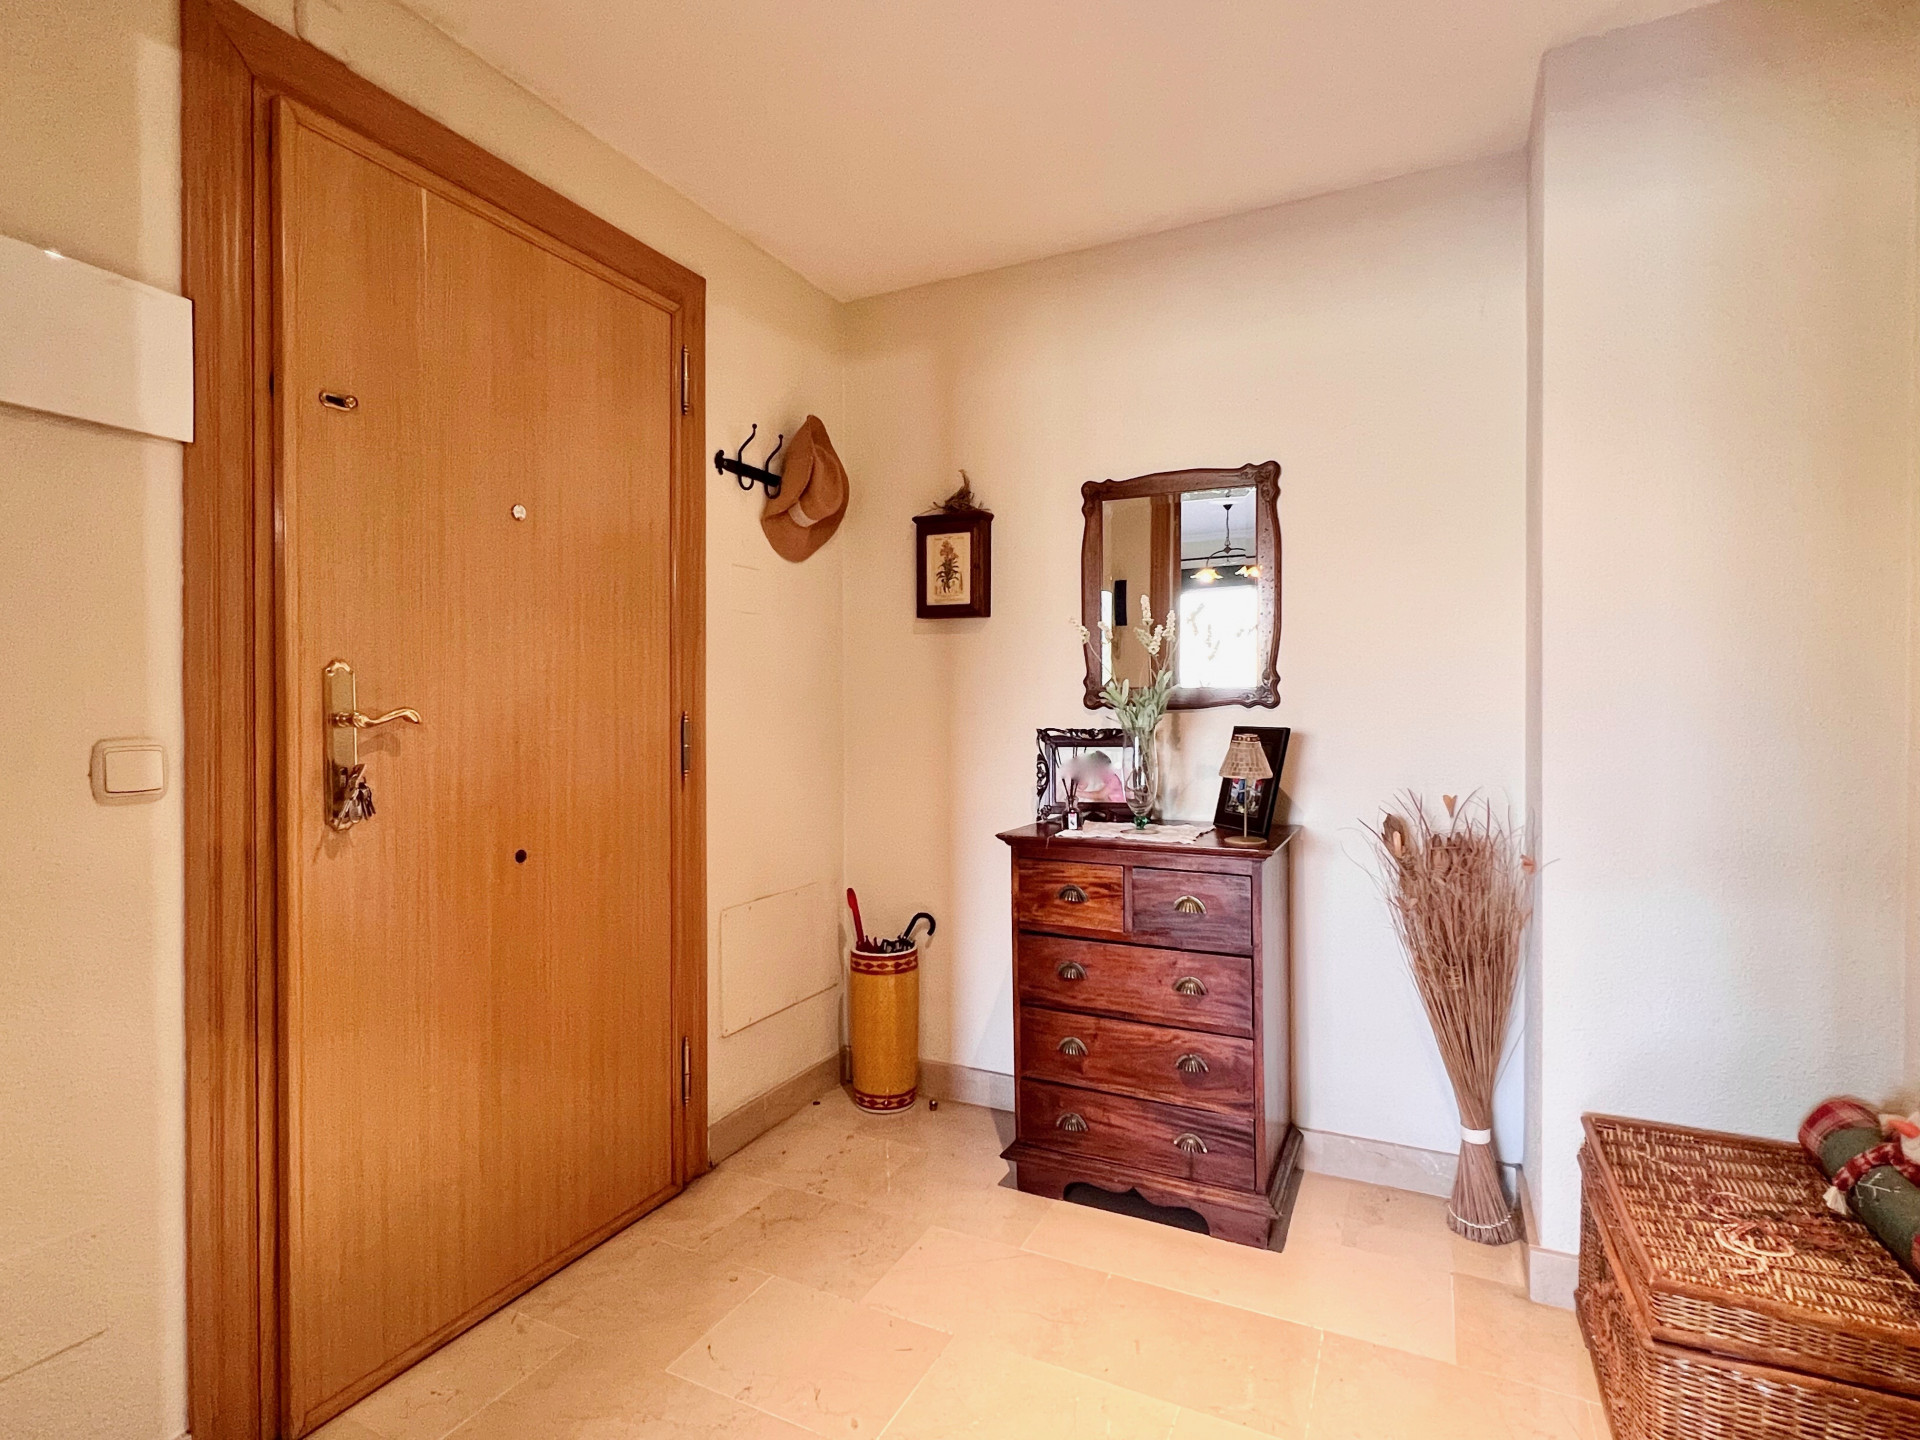 Great apartment in the heart of San Pedro Alcántara with all kinds of amenities around and a just few steps n away from the boulevard